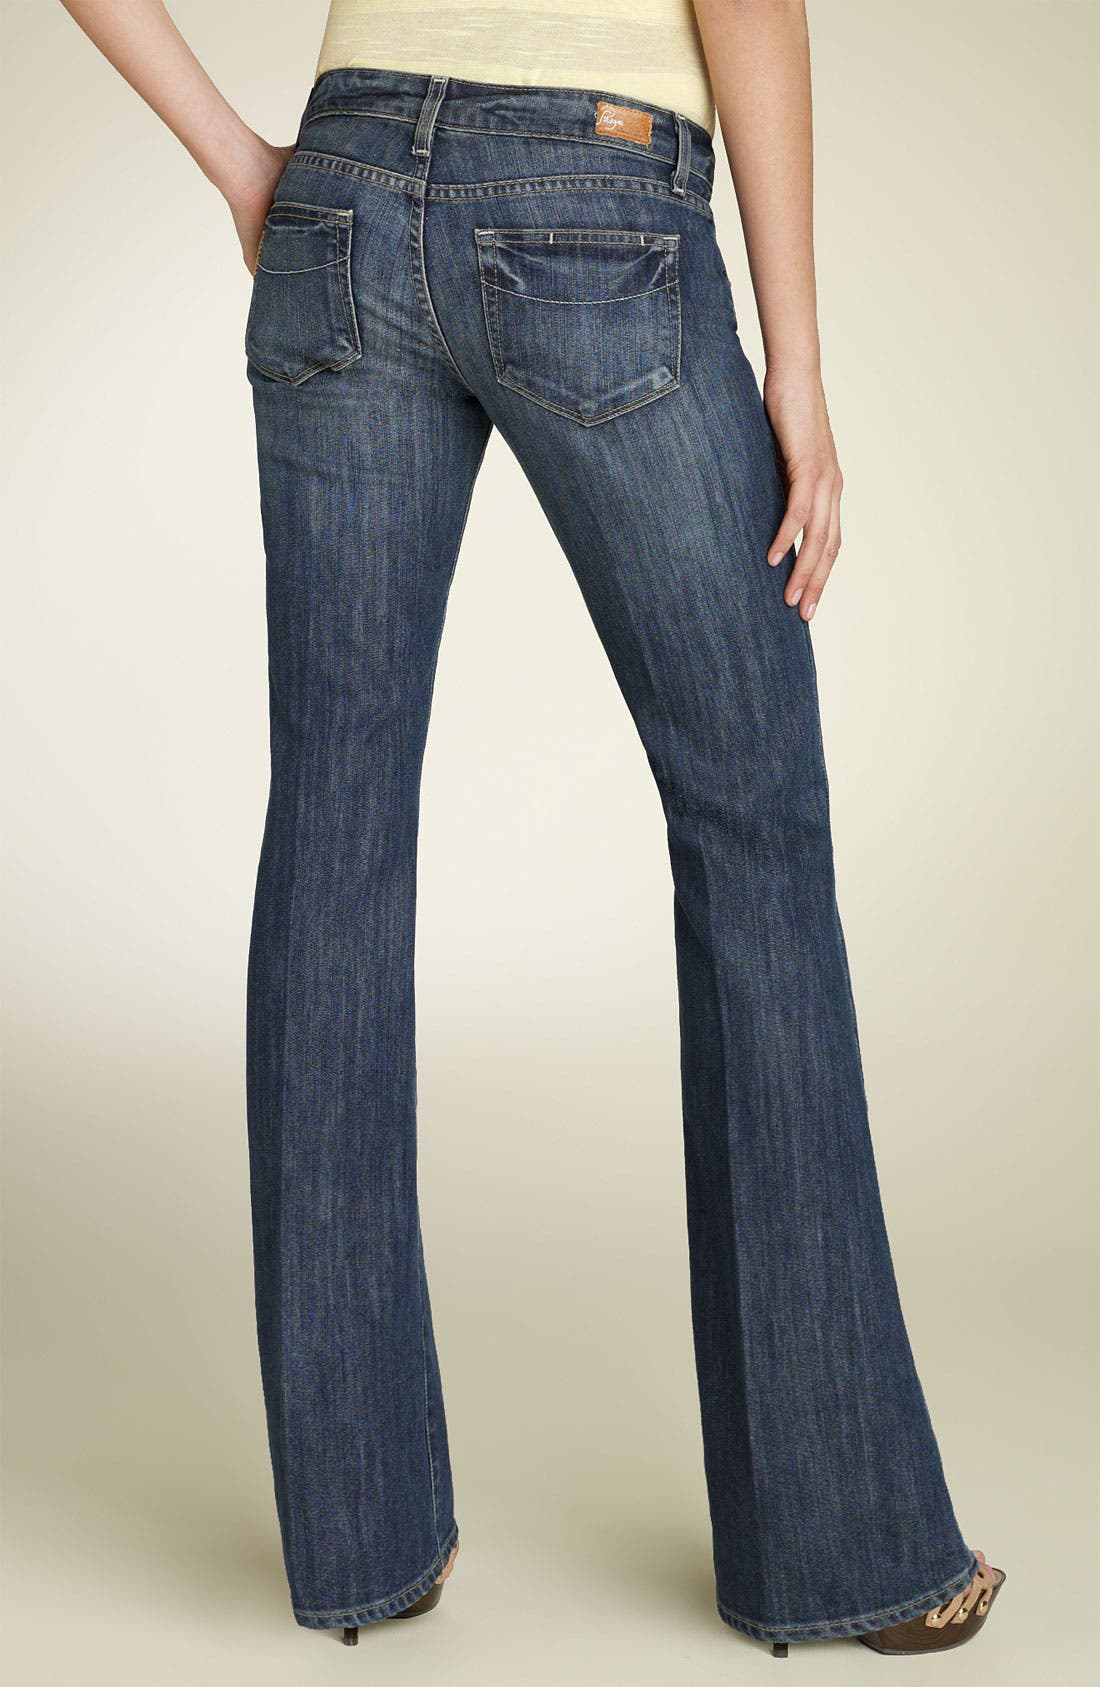 levi's 504 slouch straight women's jeans